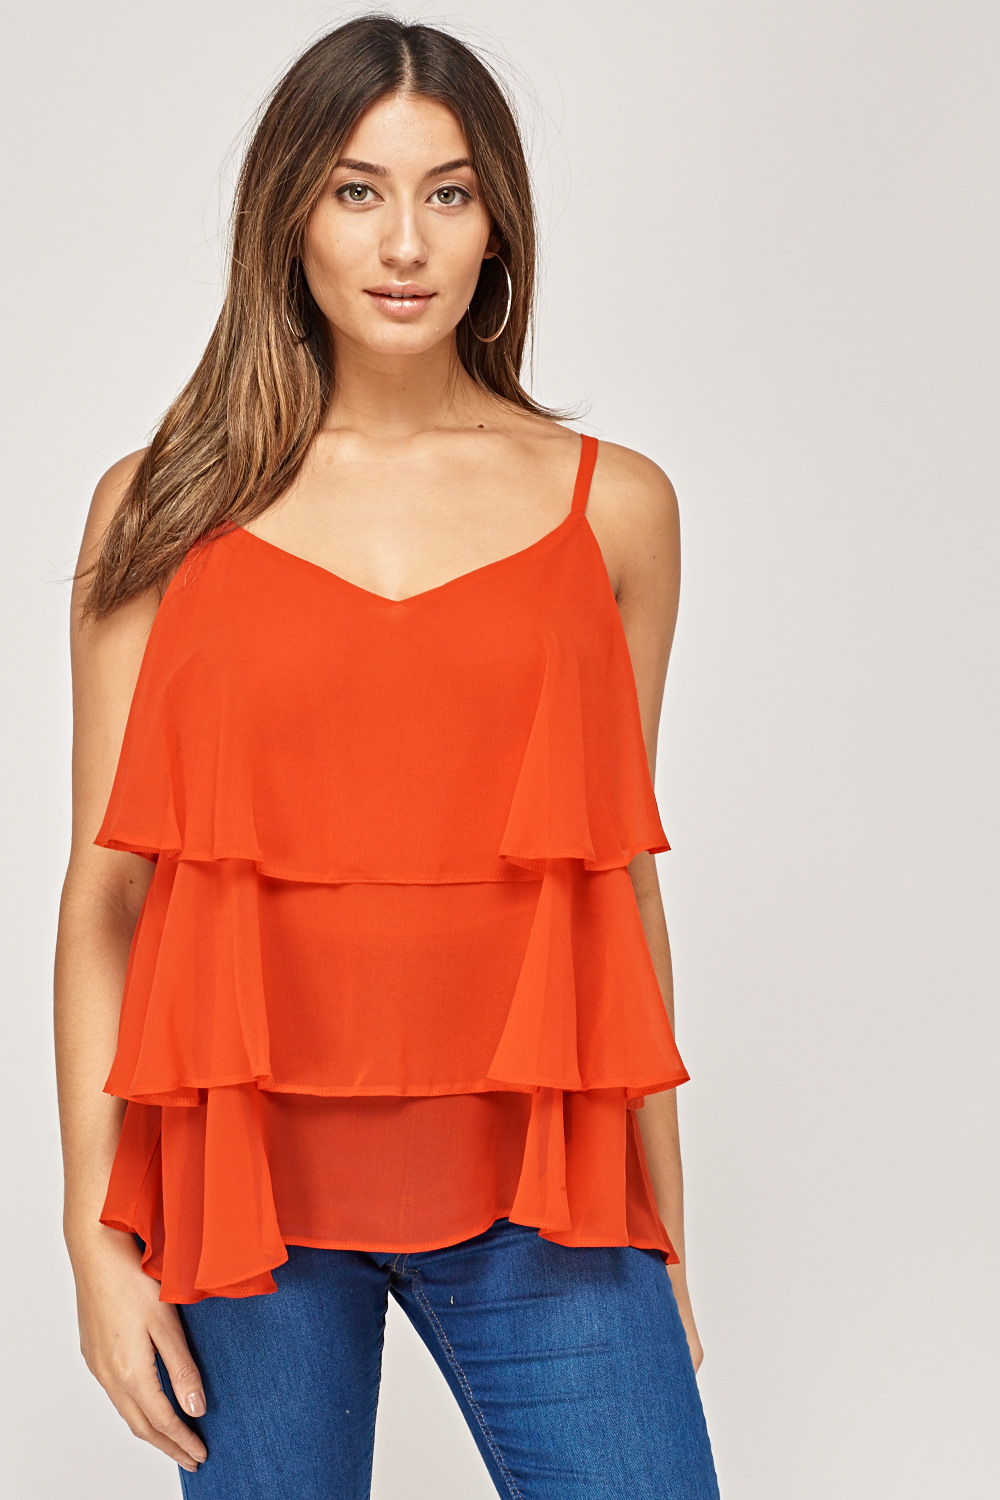 Flared Overlay Sheer Cami Top - Just $7